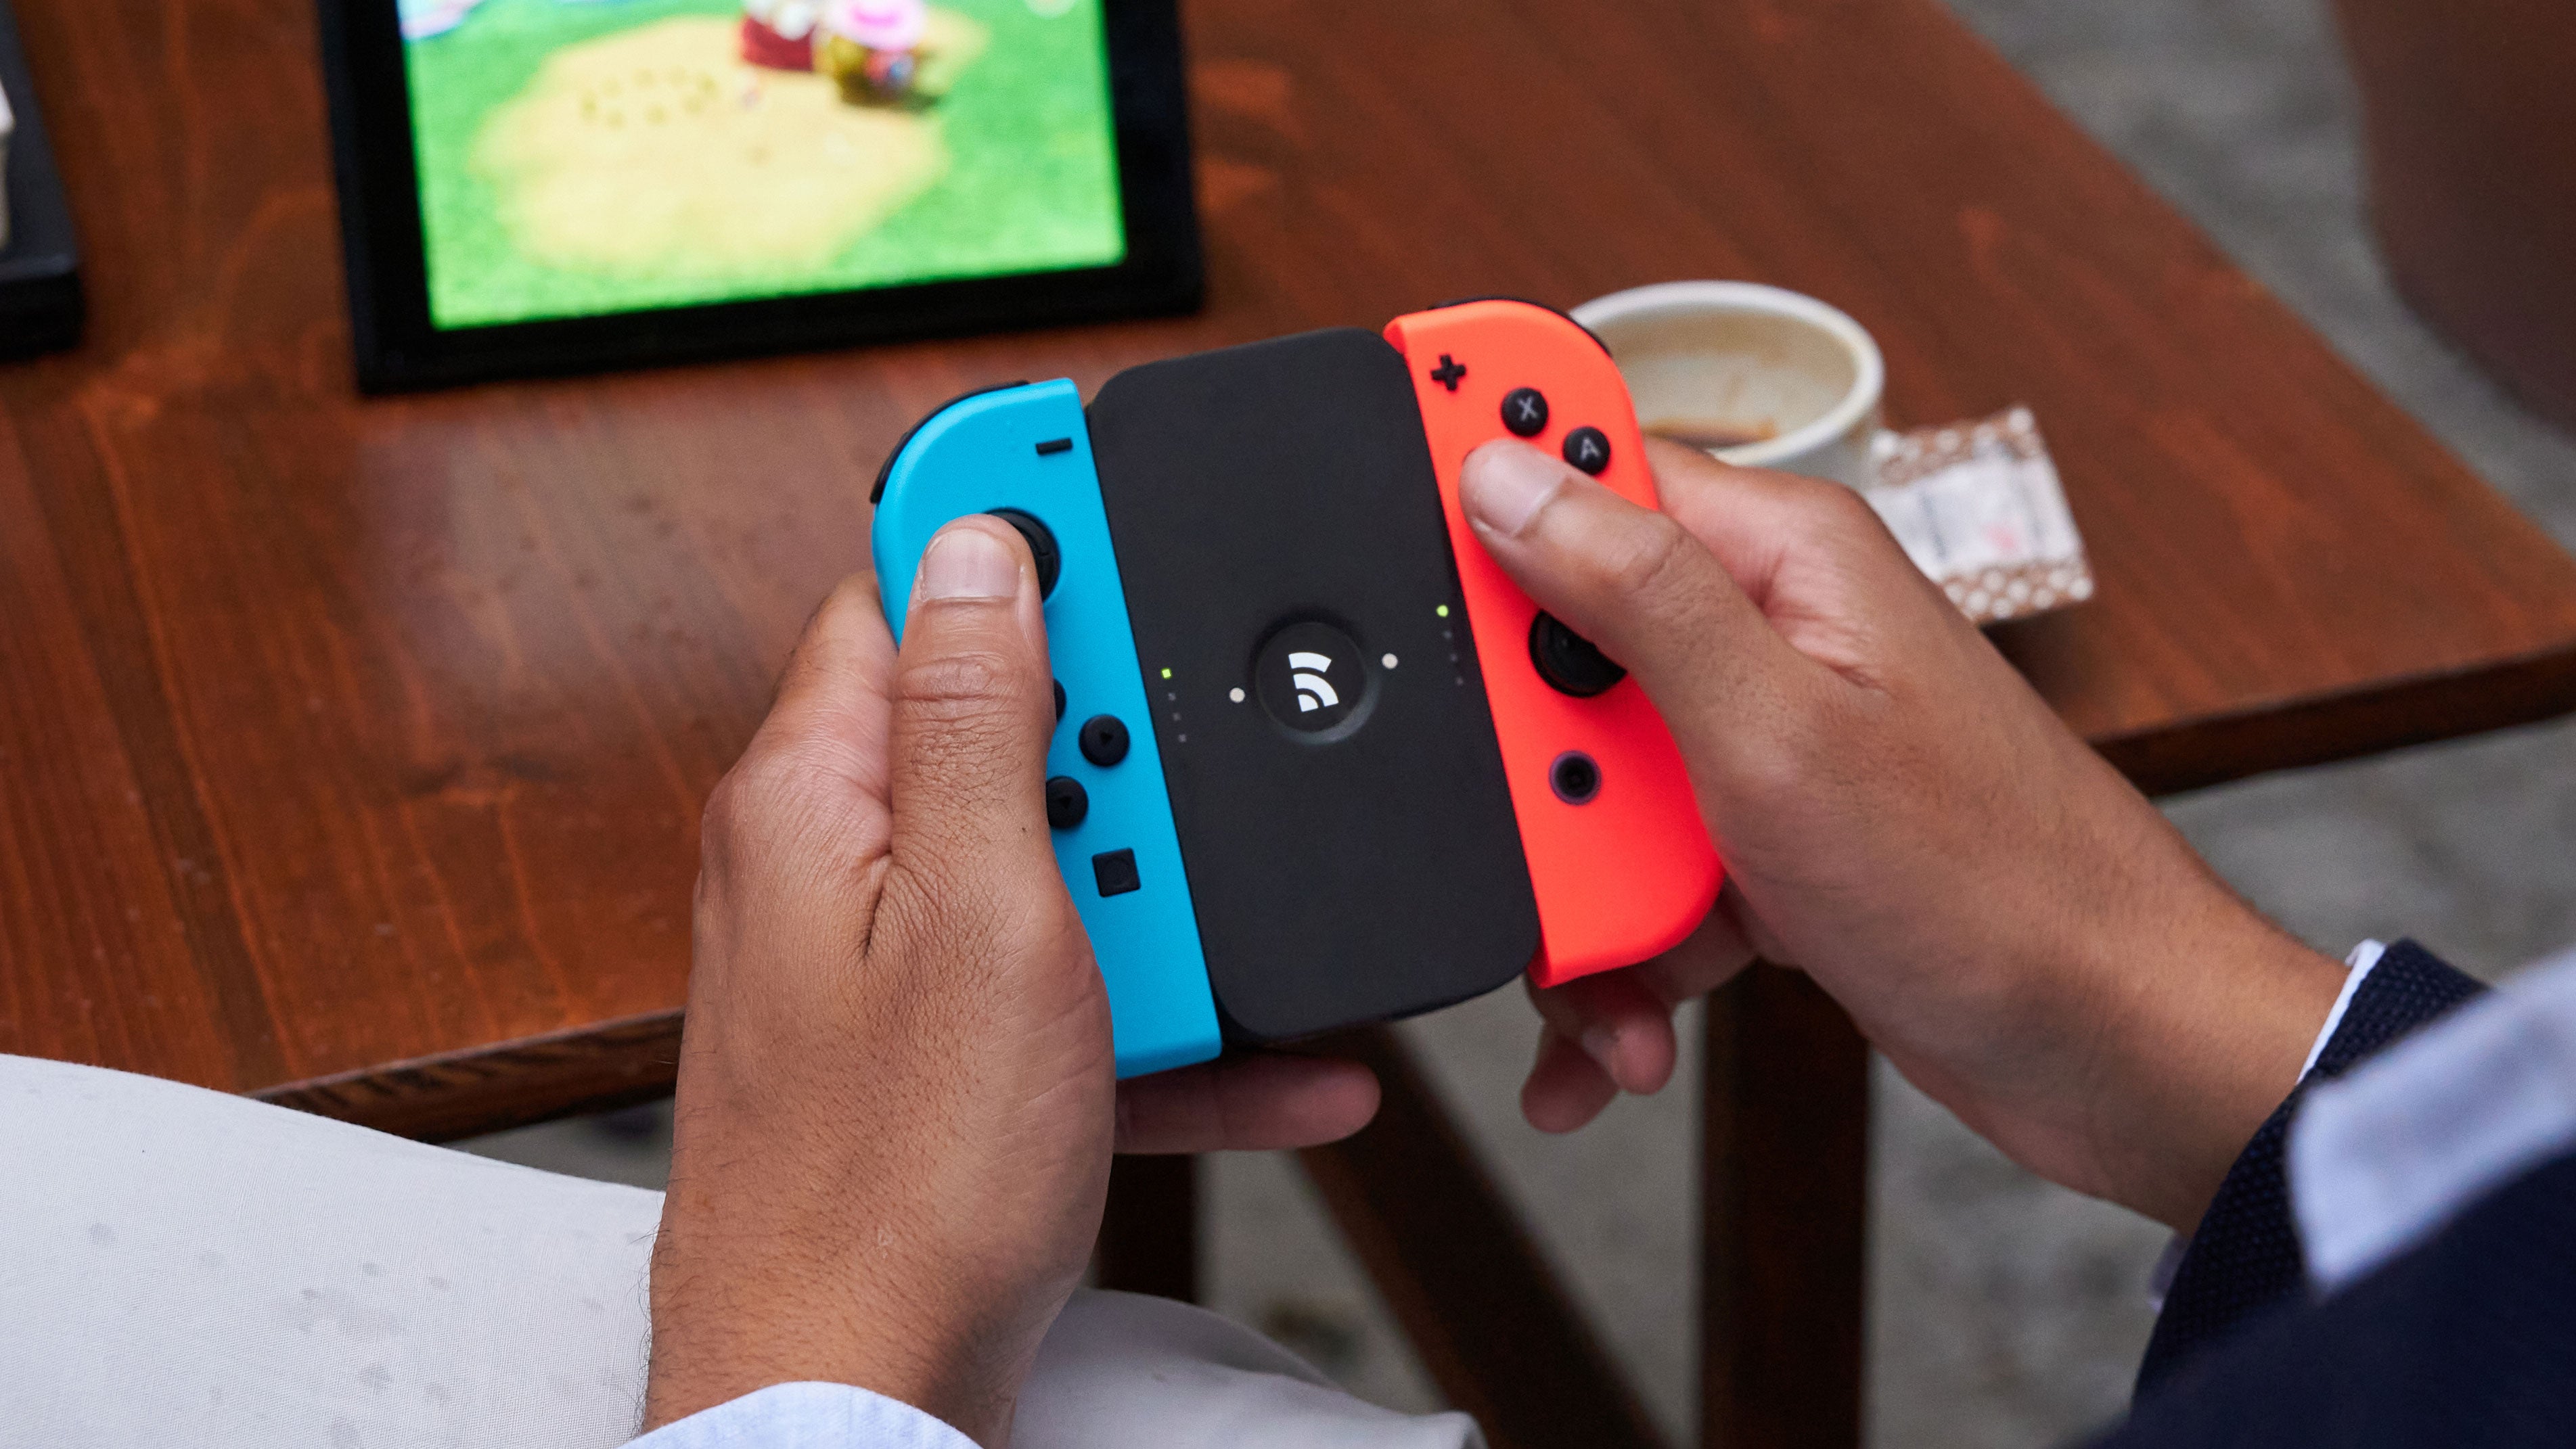 This Multifunction Battery Seems Like a Must-Have Travel Accessory for the Nintendo Switch